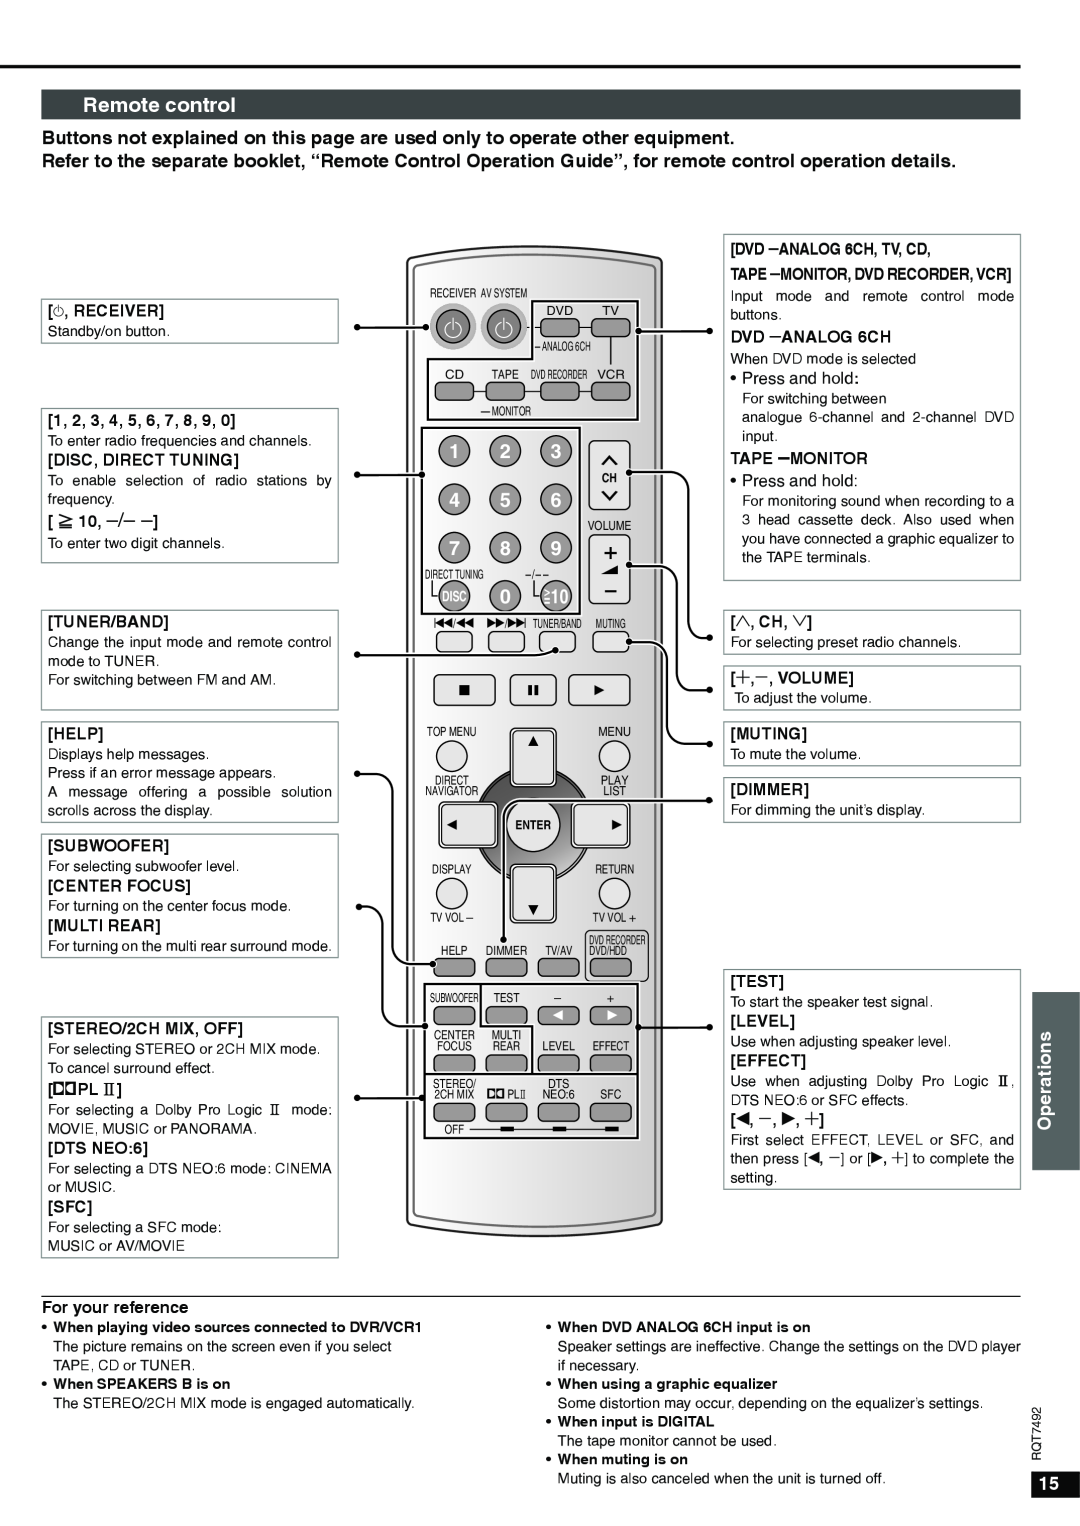 Panasonic SA-XR50 specifications Remote control, =, Operations 